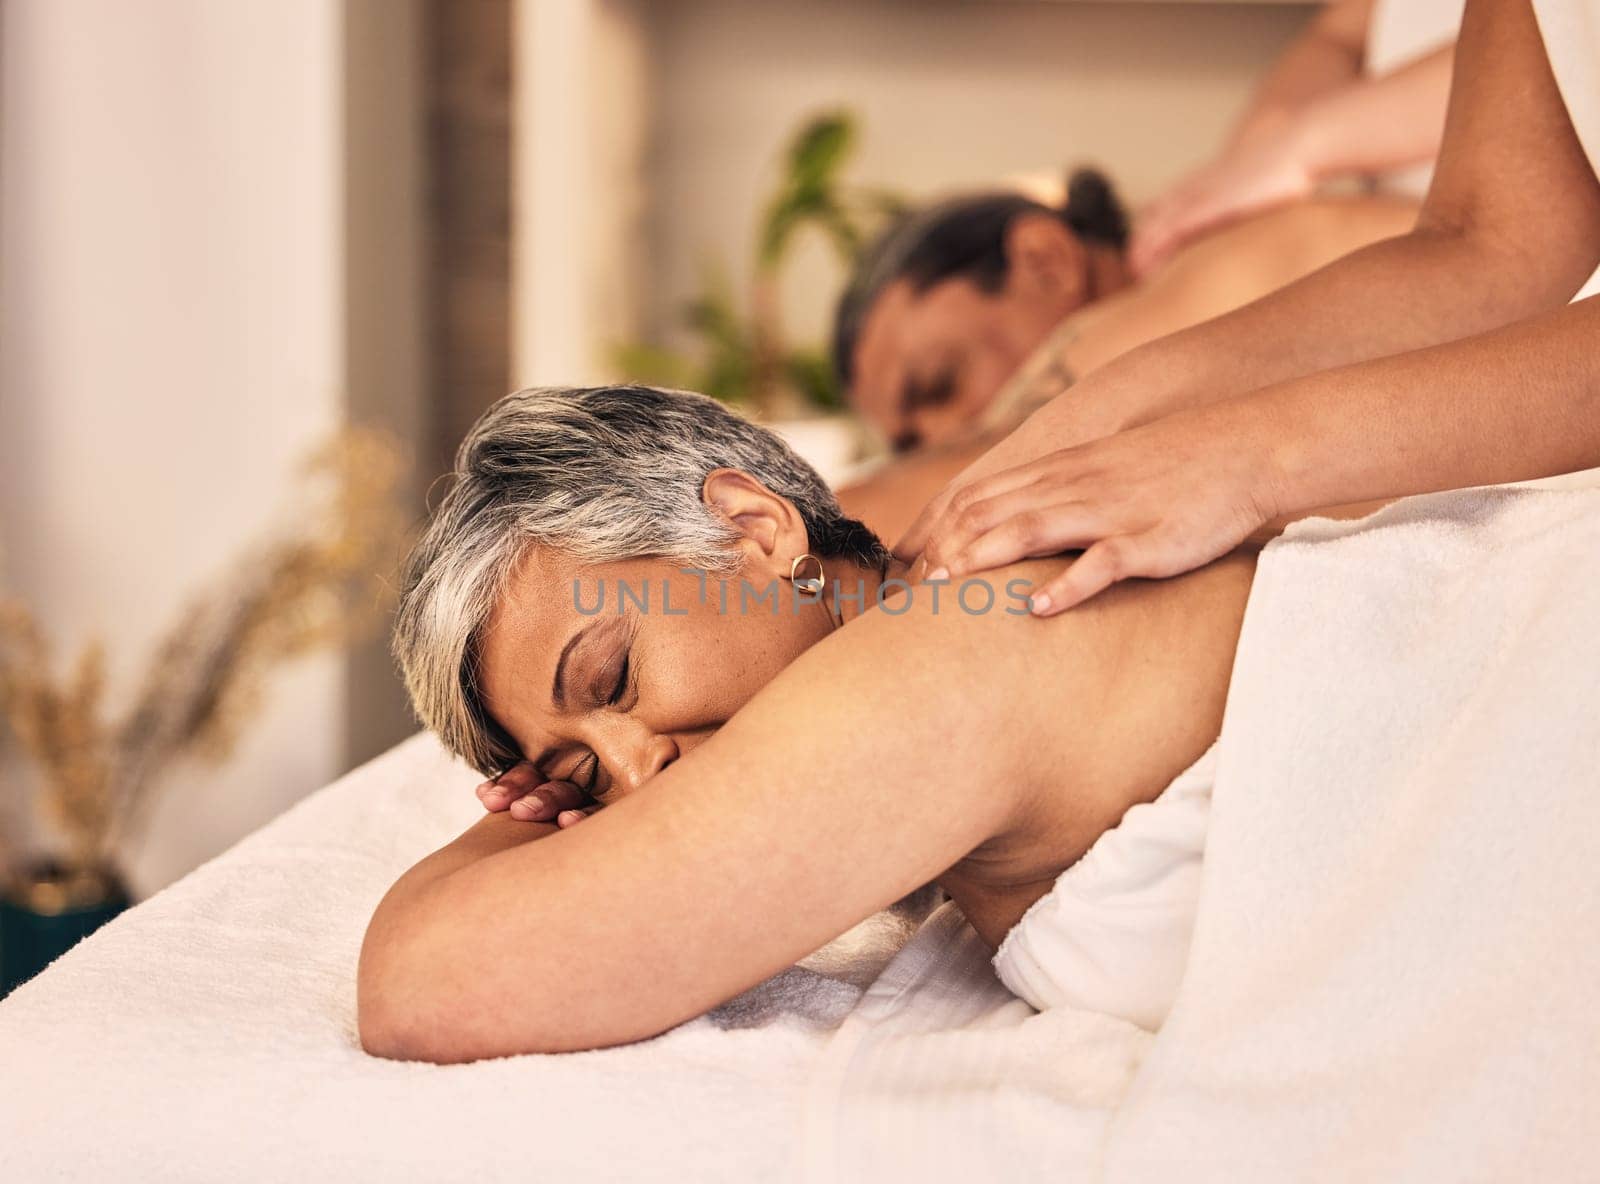 Relax, elderly and a couple at the spa for a massage together for peace, wellness or bonding. Luxury, hospitality or body care with a senior woman and man in a beauty salon for physical therapy by YuriArcurs